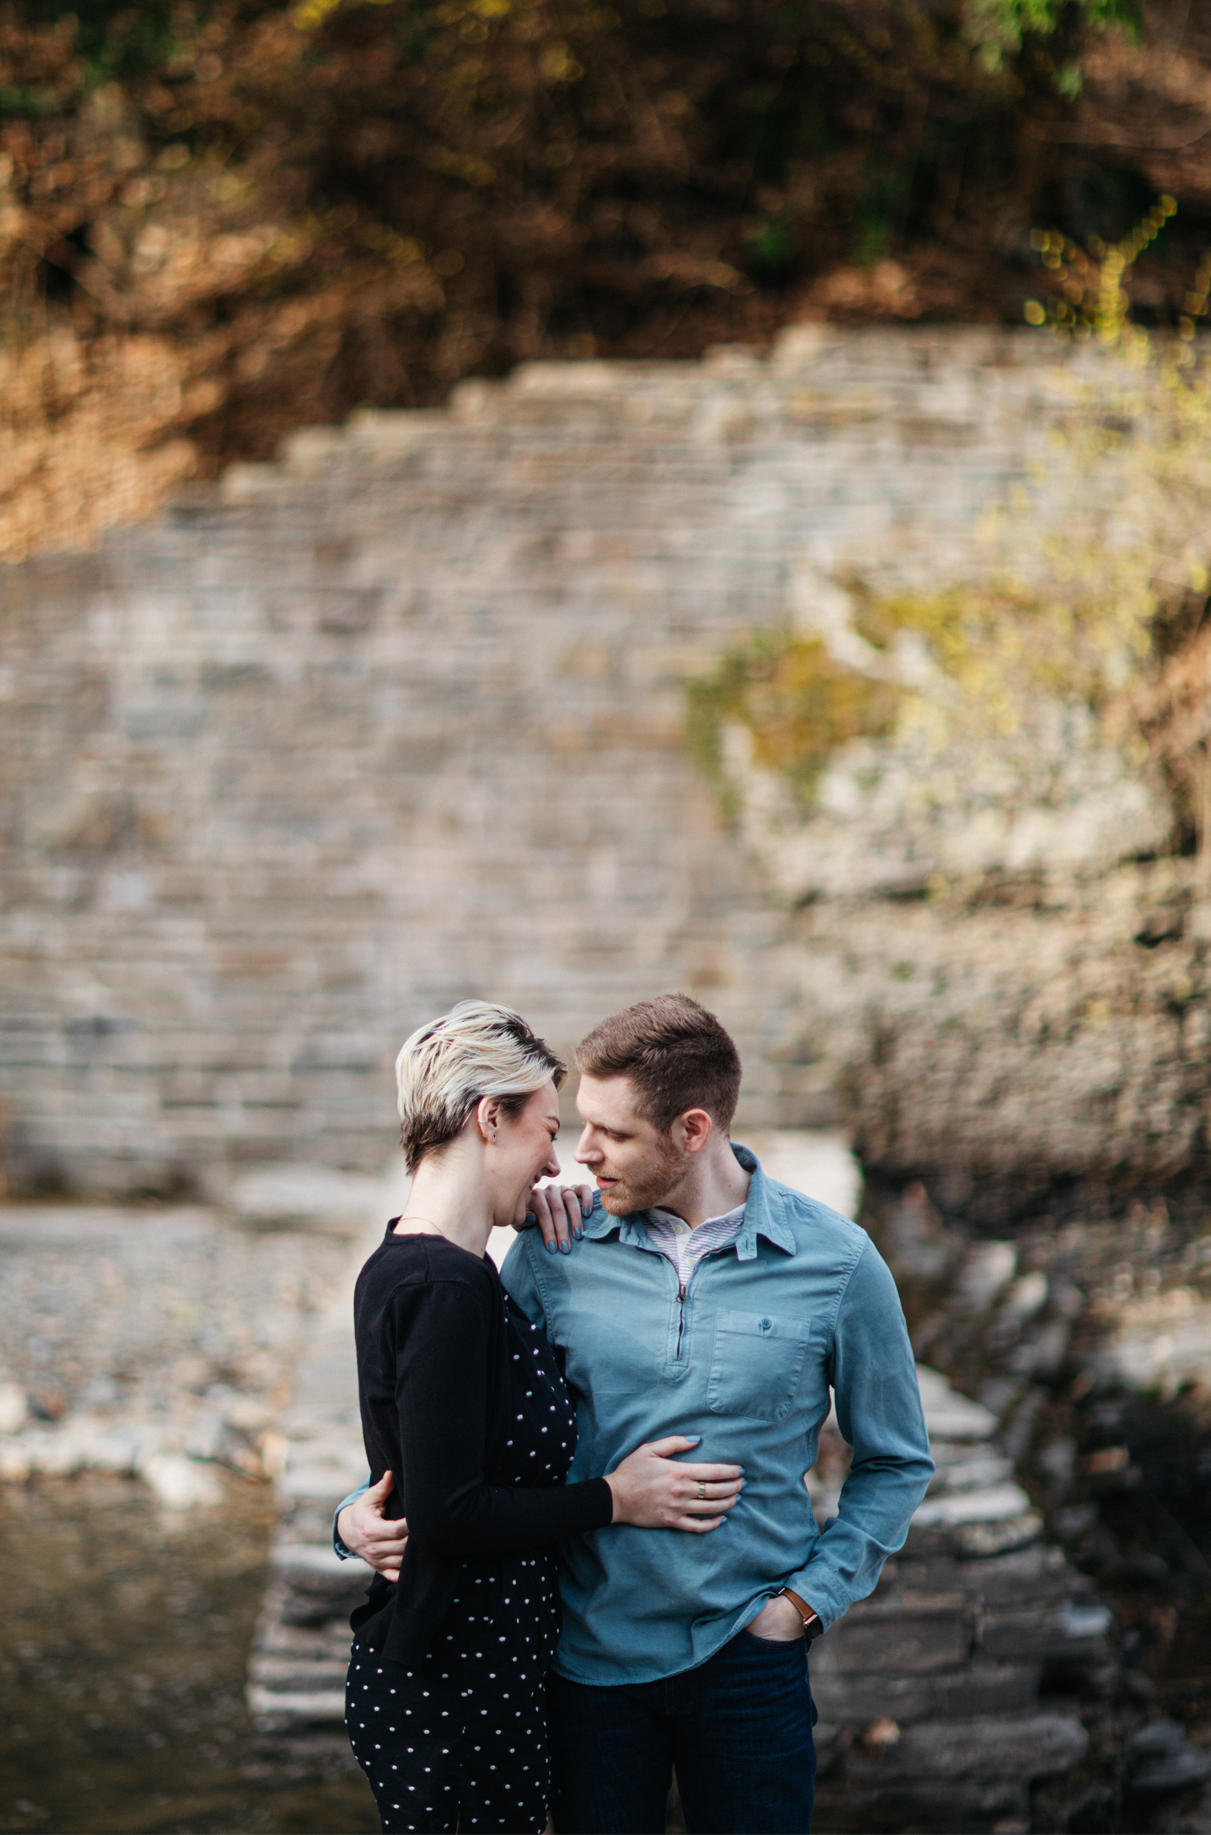 Couple embraces and smiles during Buttermilk falls engagement session Ithaca NY